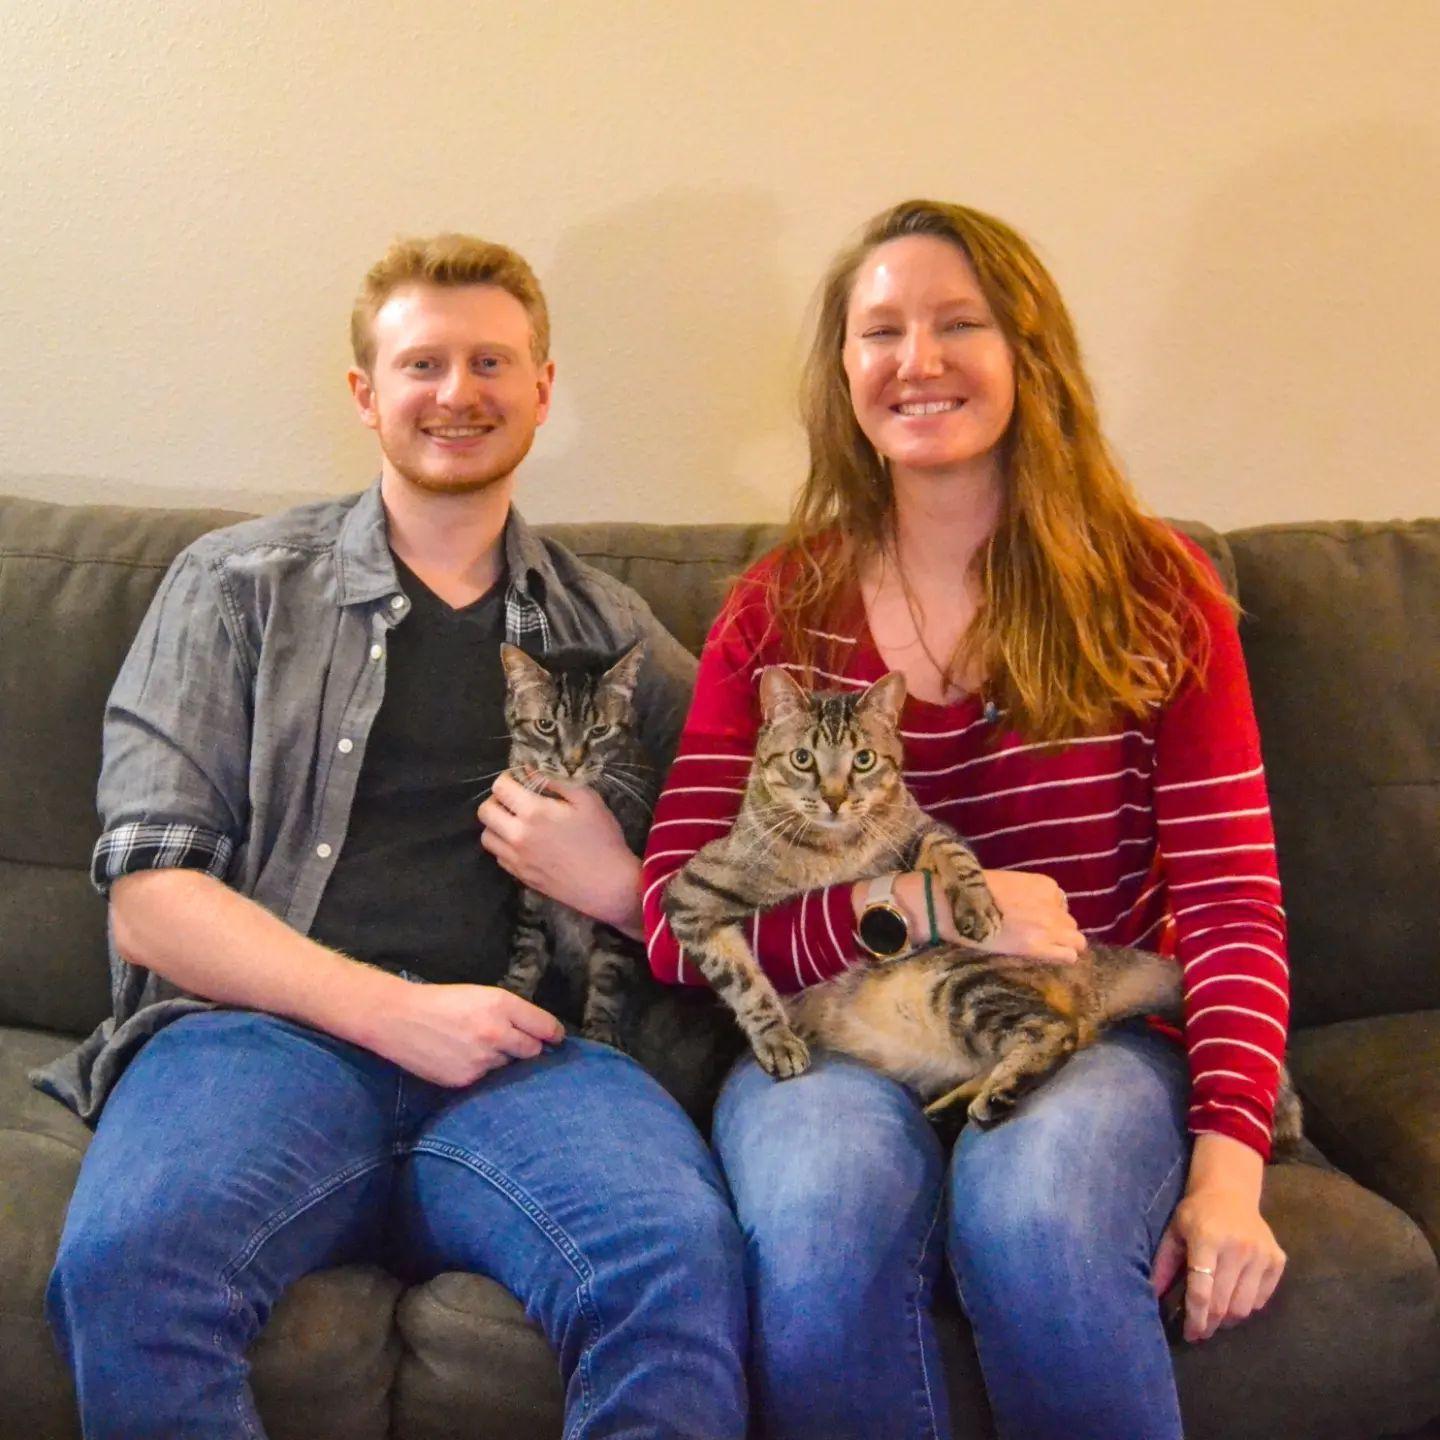 Trying to take family photos with cats... not easy